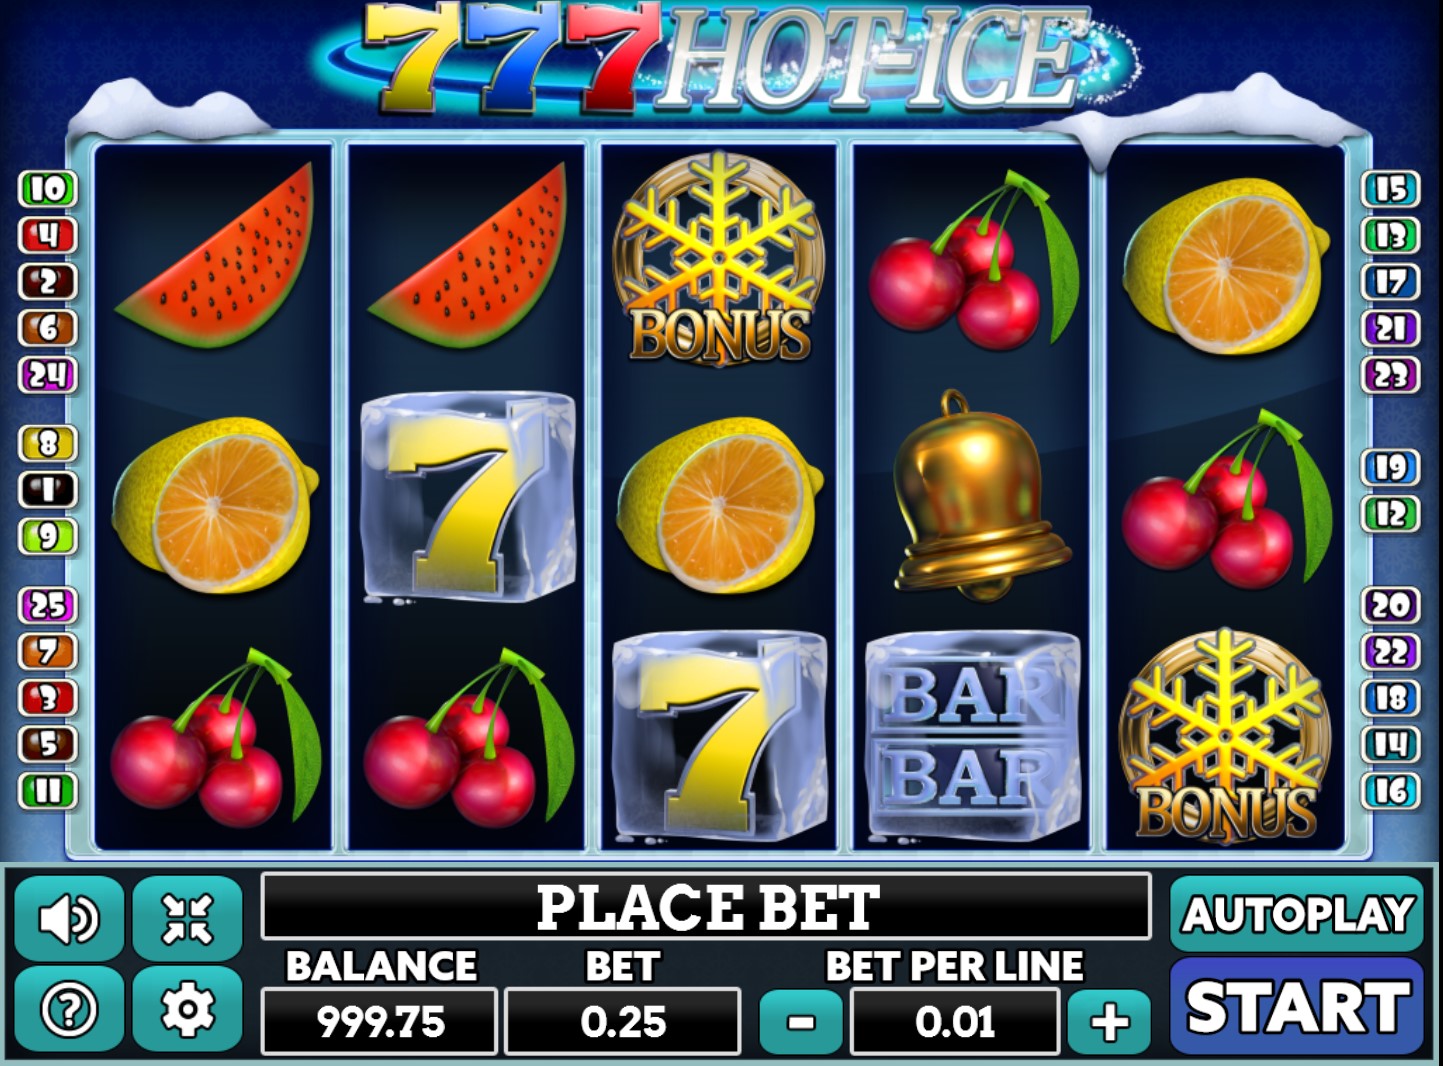 Global Live Casino Mobile Slot Games Review